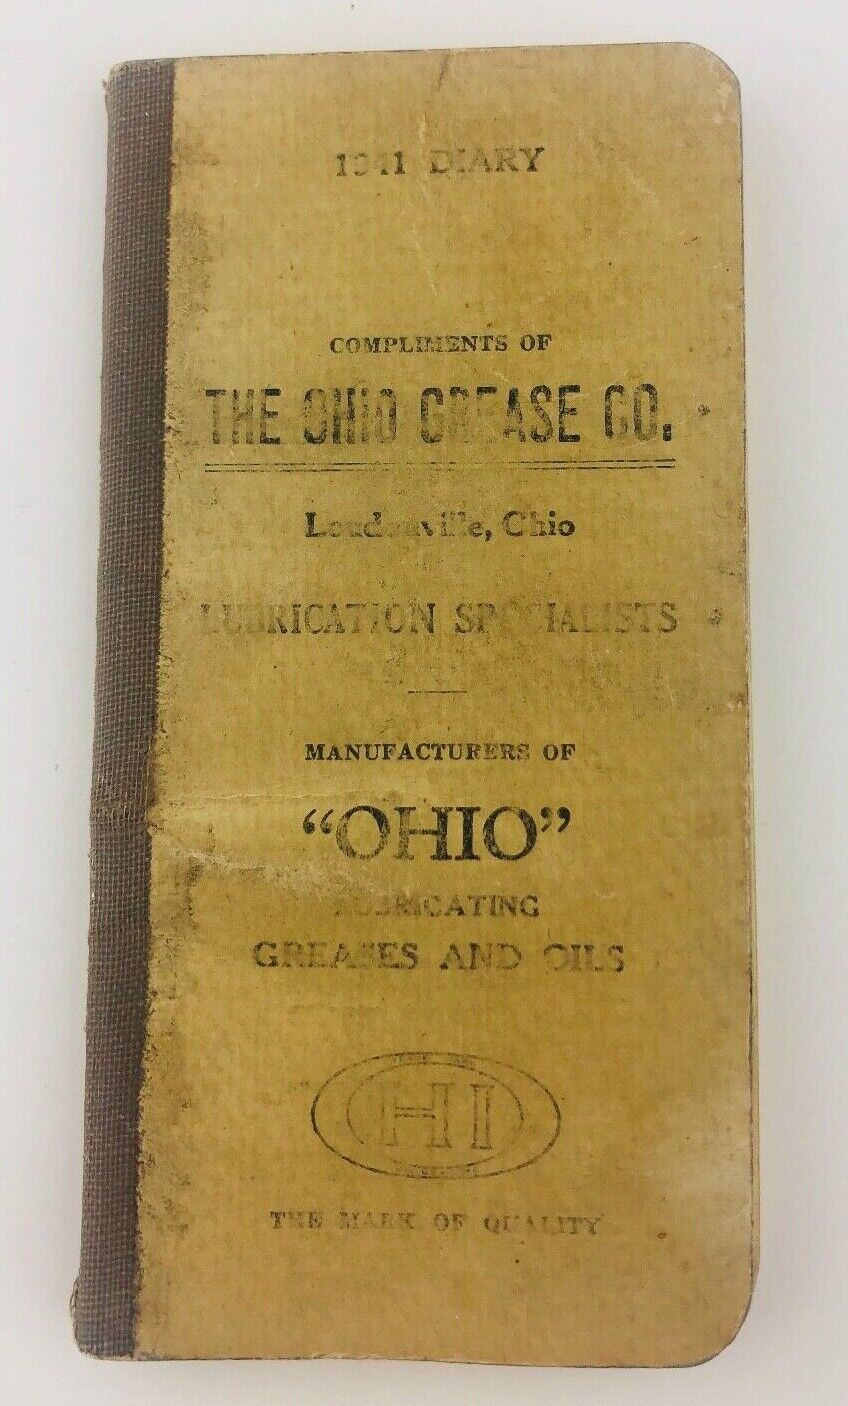 Vintage The Ohio Grease Company 1941 Pocket Diary Advertising Giveaway